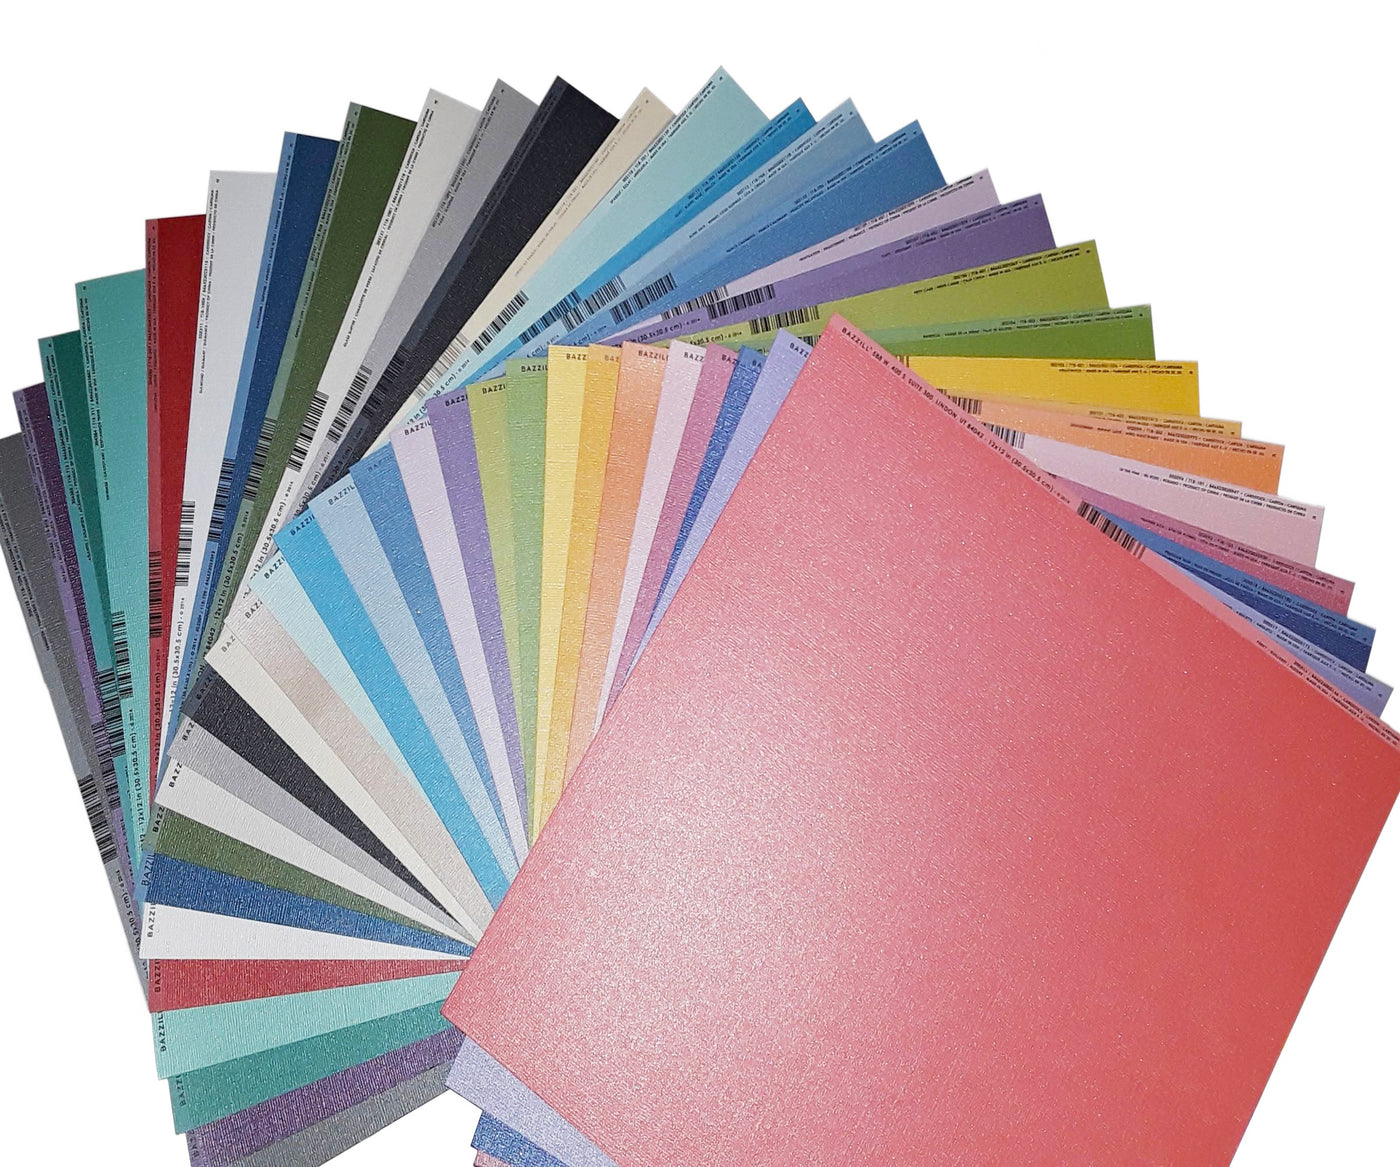 Bazzill Bling Assortment Pack includes all 29 colors of 12x12 mica-coated cardstock